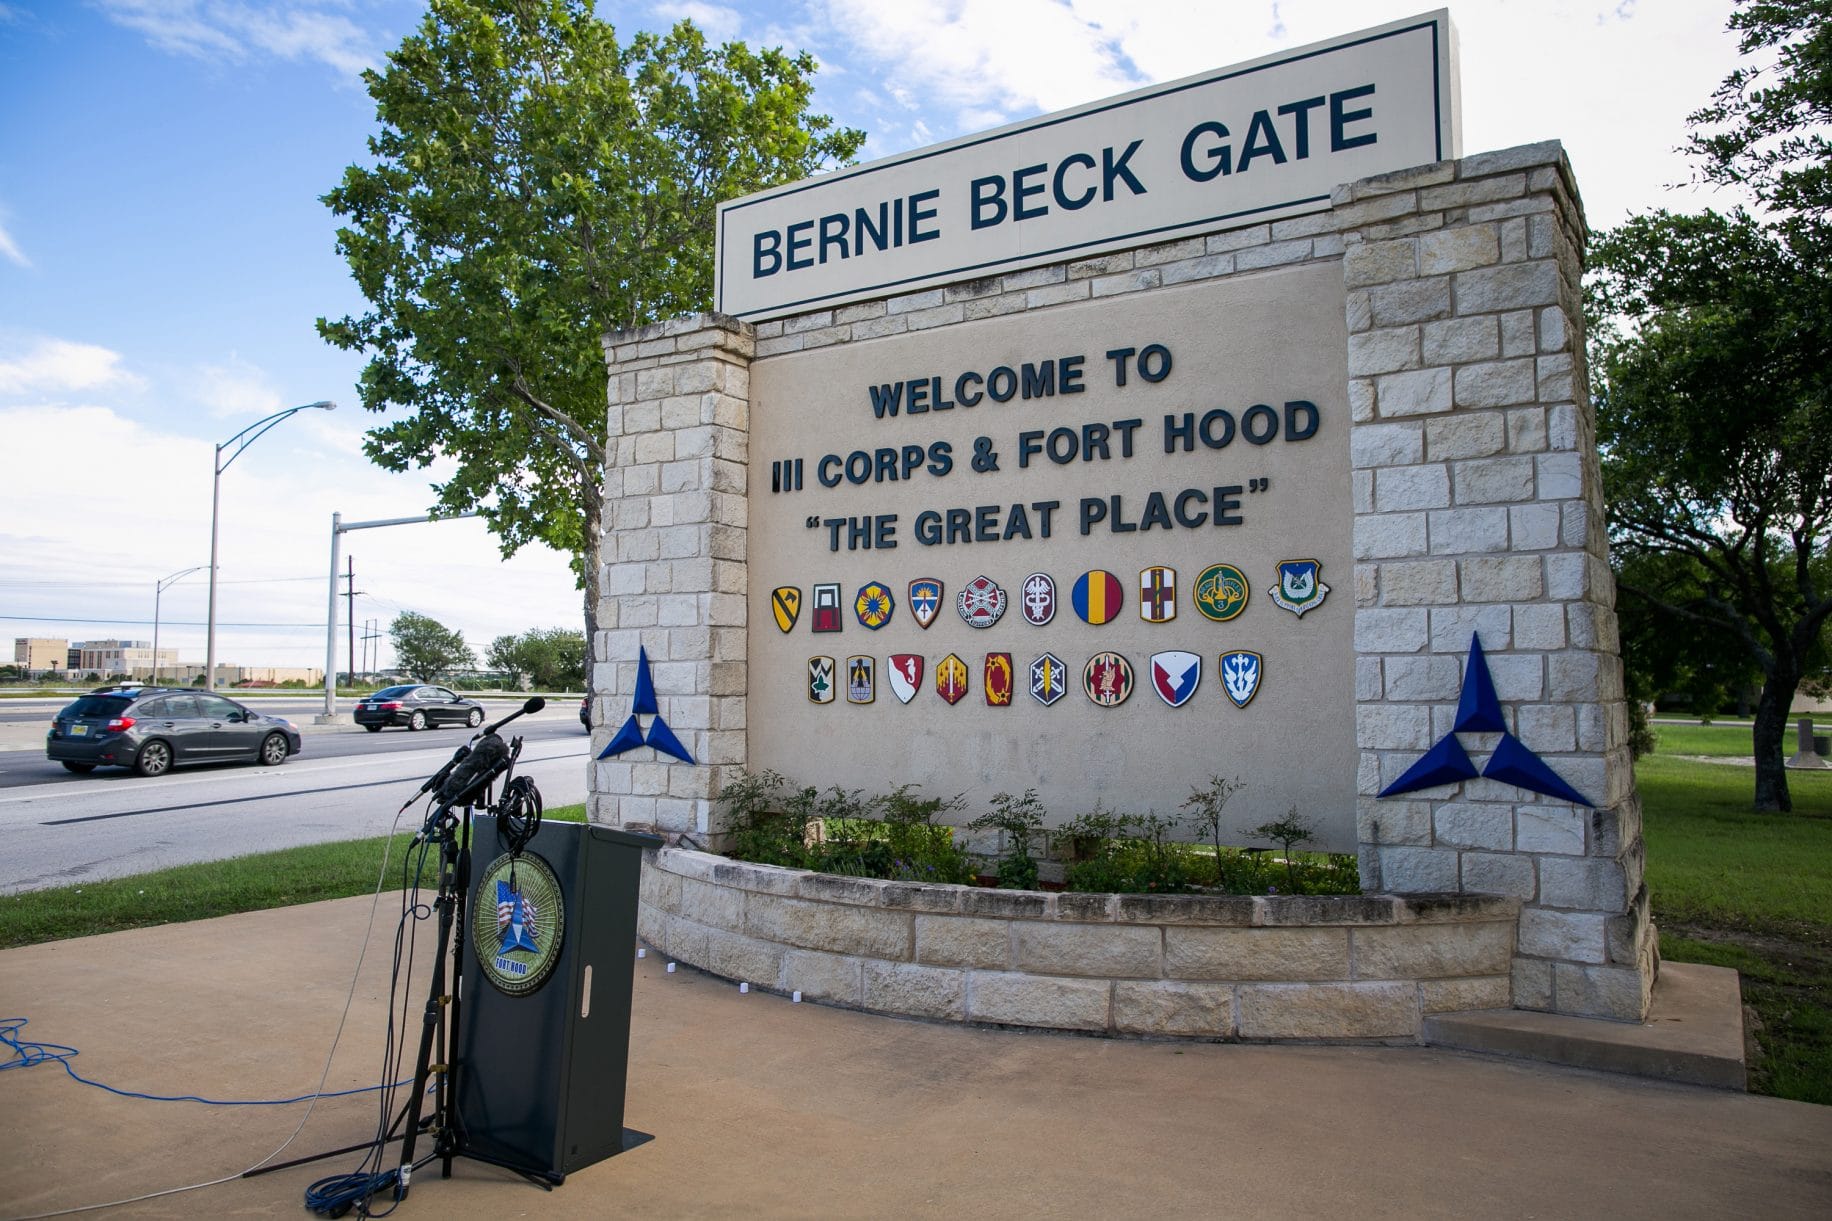 Fort Hood soldiers say ‘Great Place’ also known for violence